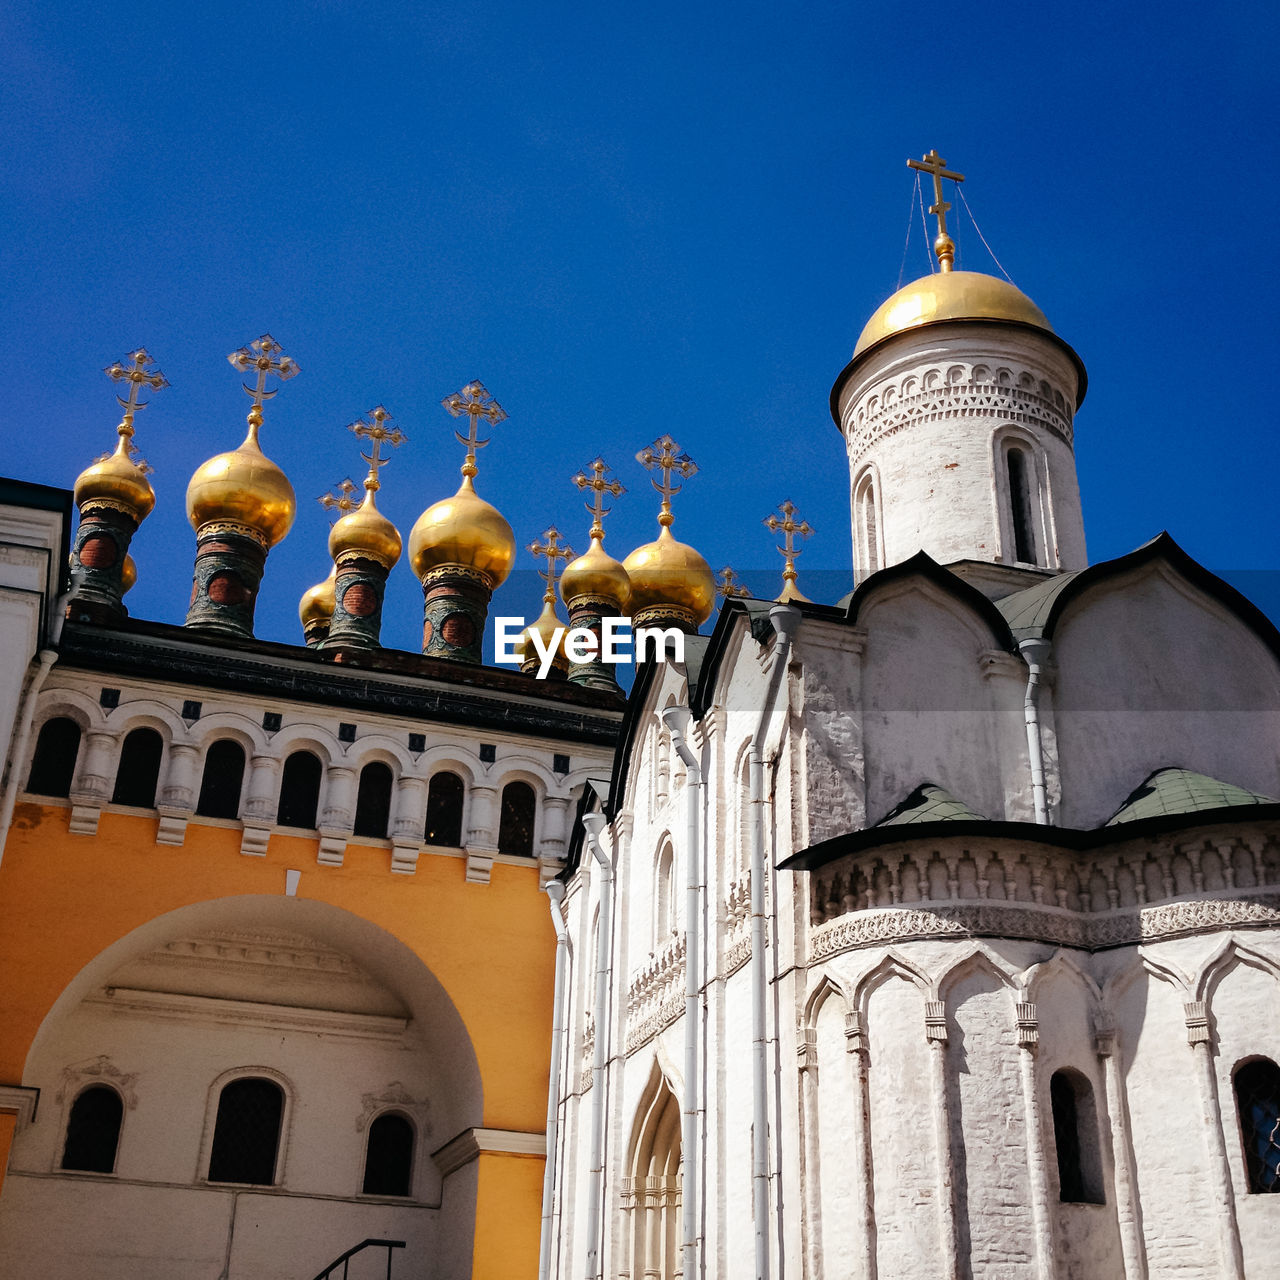 Golden domes of terem churches against clear blue sky